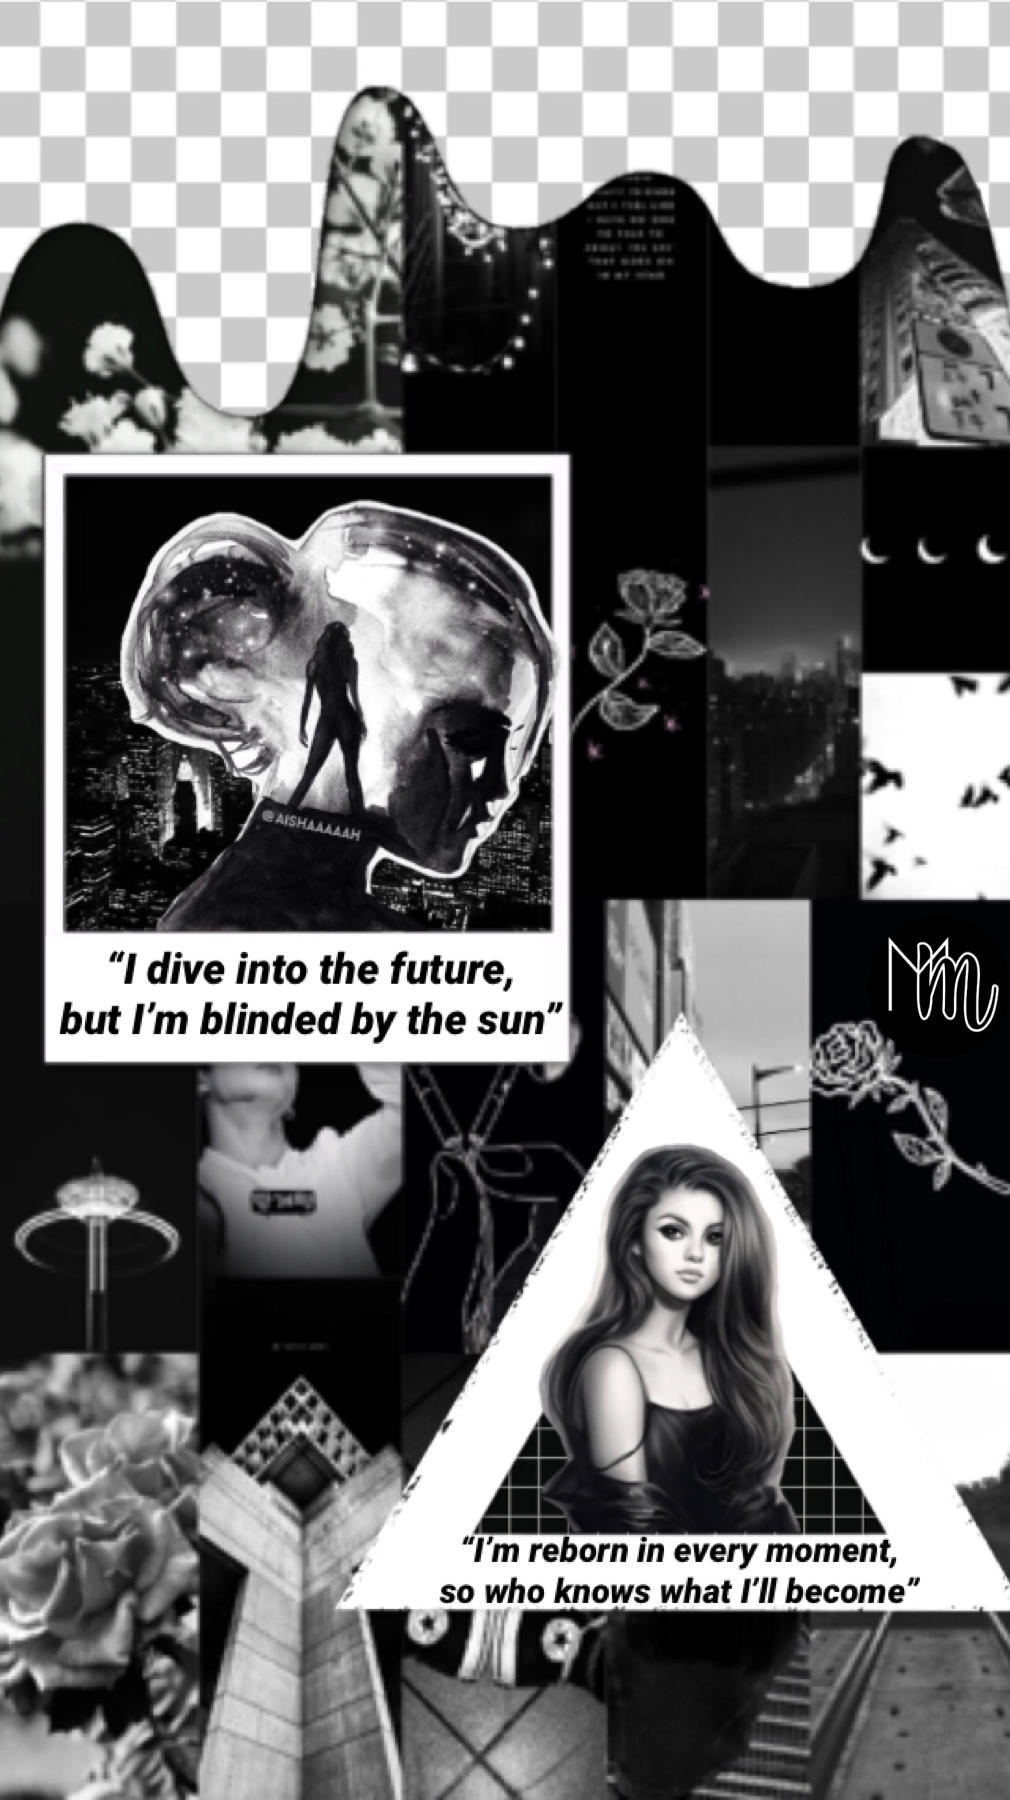 Tap

Sorry I haven’t posted in a while! Here’s a complex edit of Selena. Hope you like it!